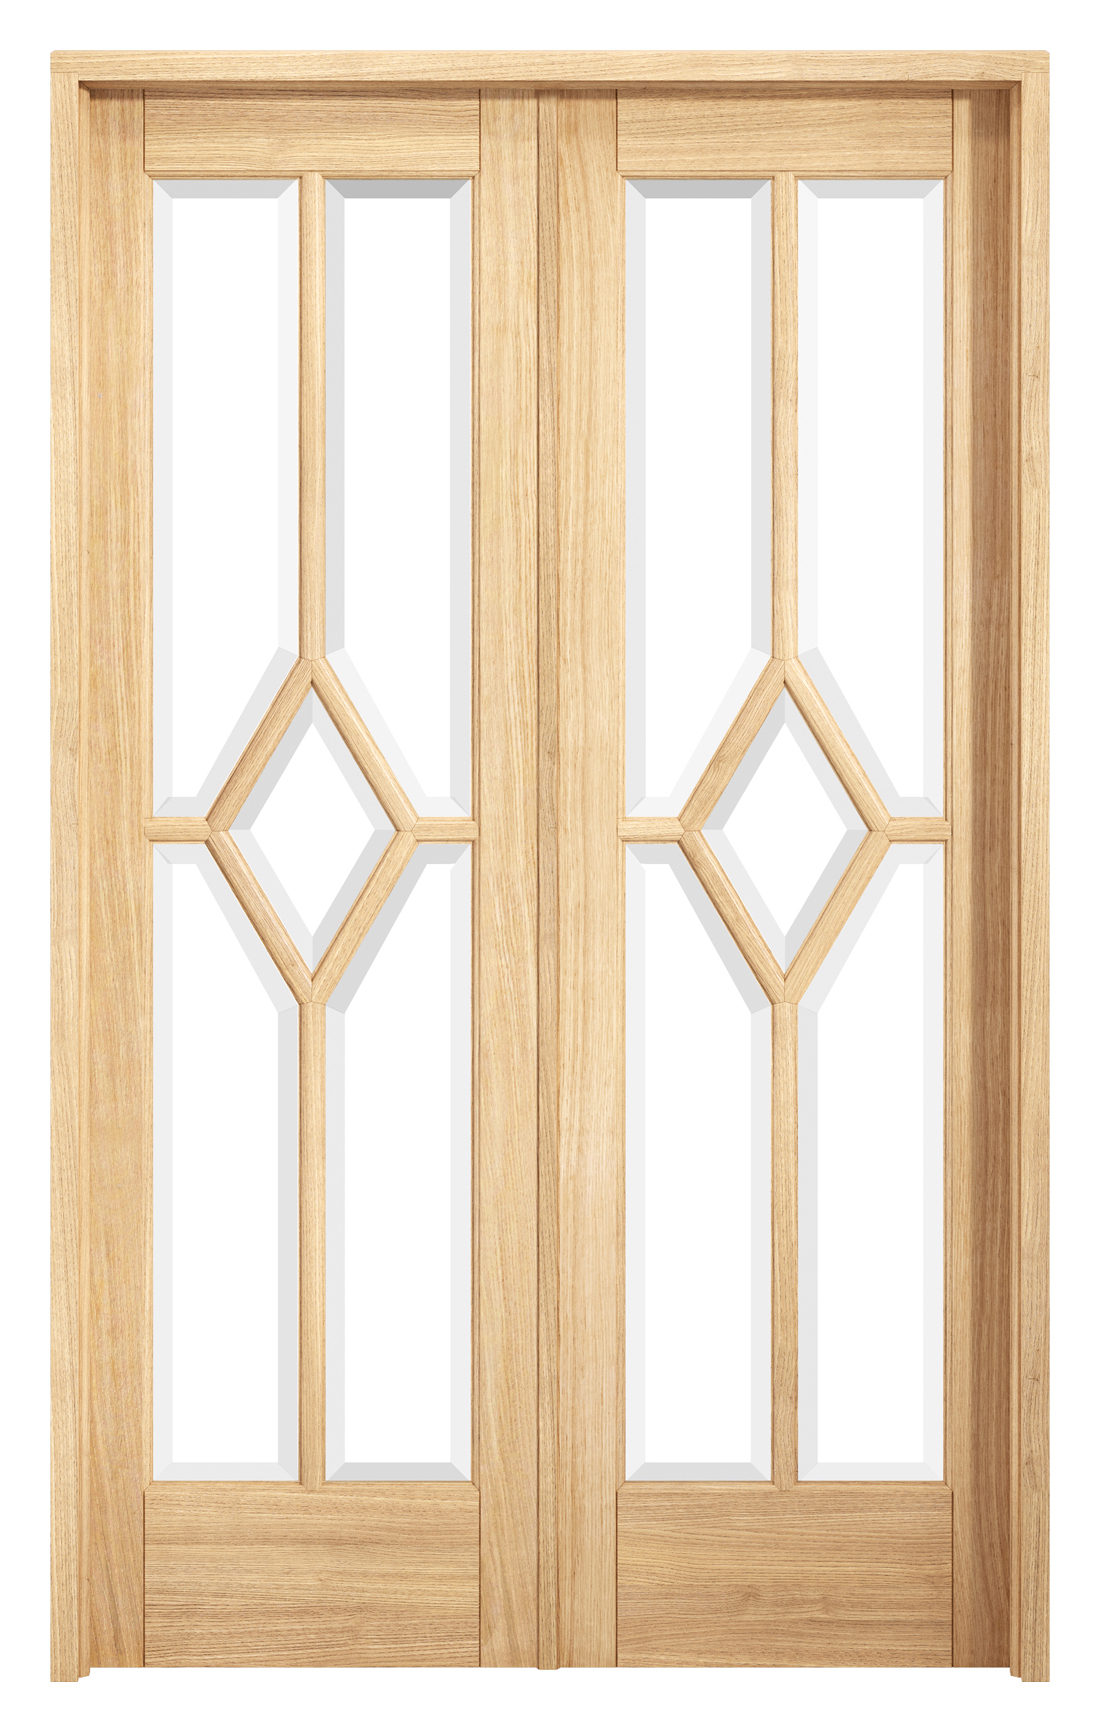 Image of LPD Internal Reims Room Divider W4 Pre-Finished Oak Solid Core Door - 1246 x 2031mm